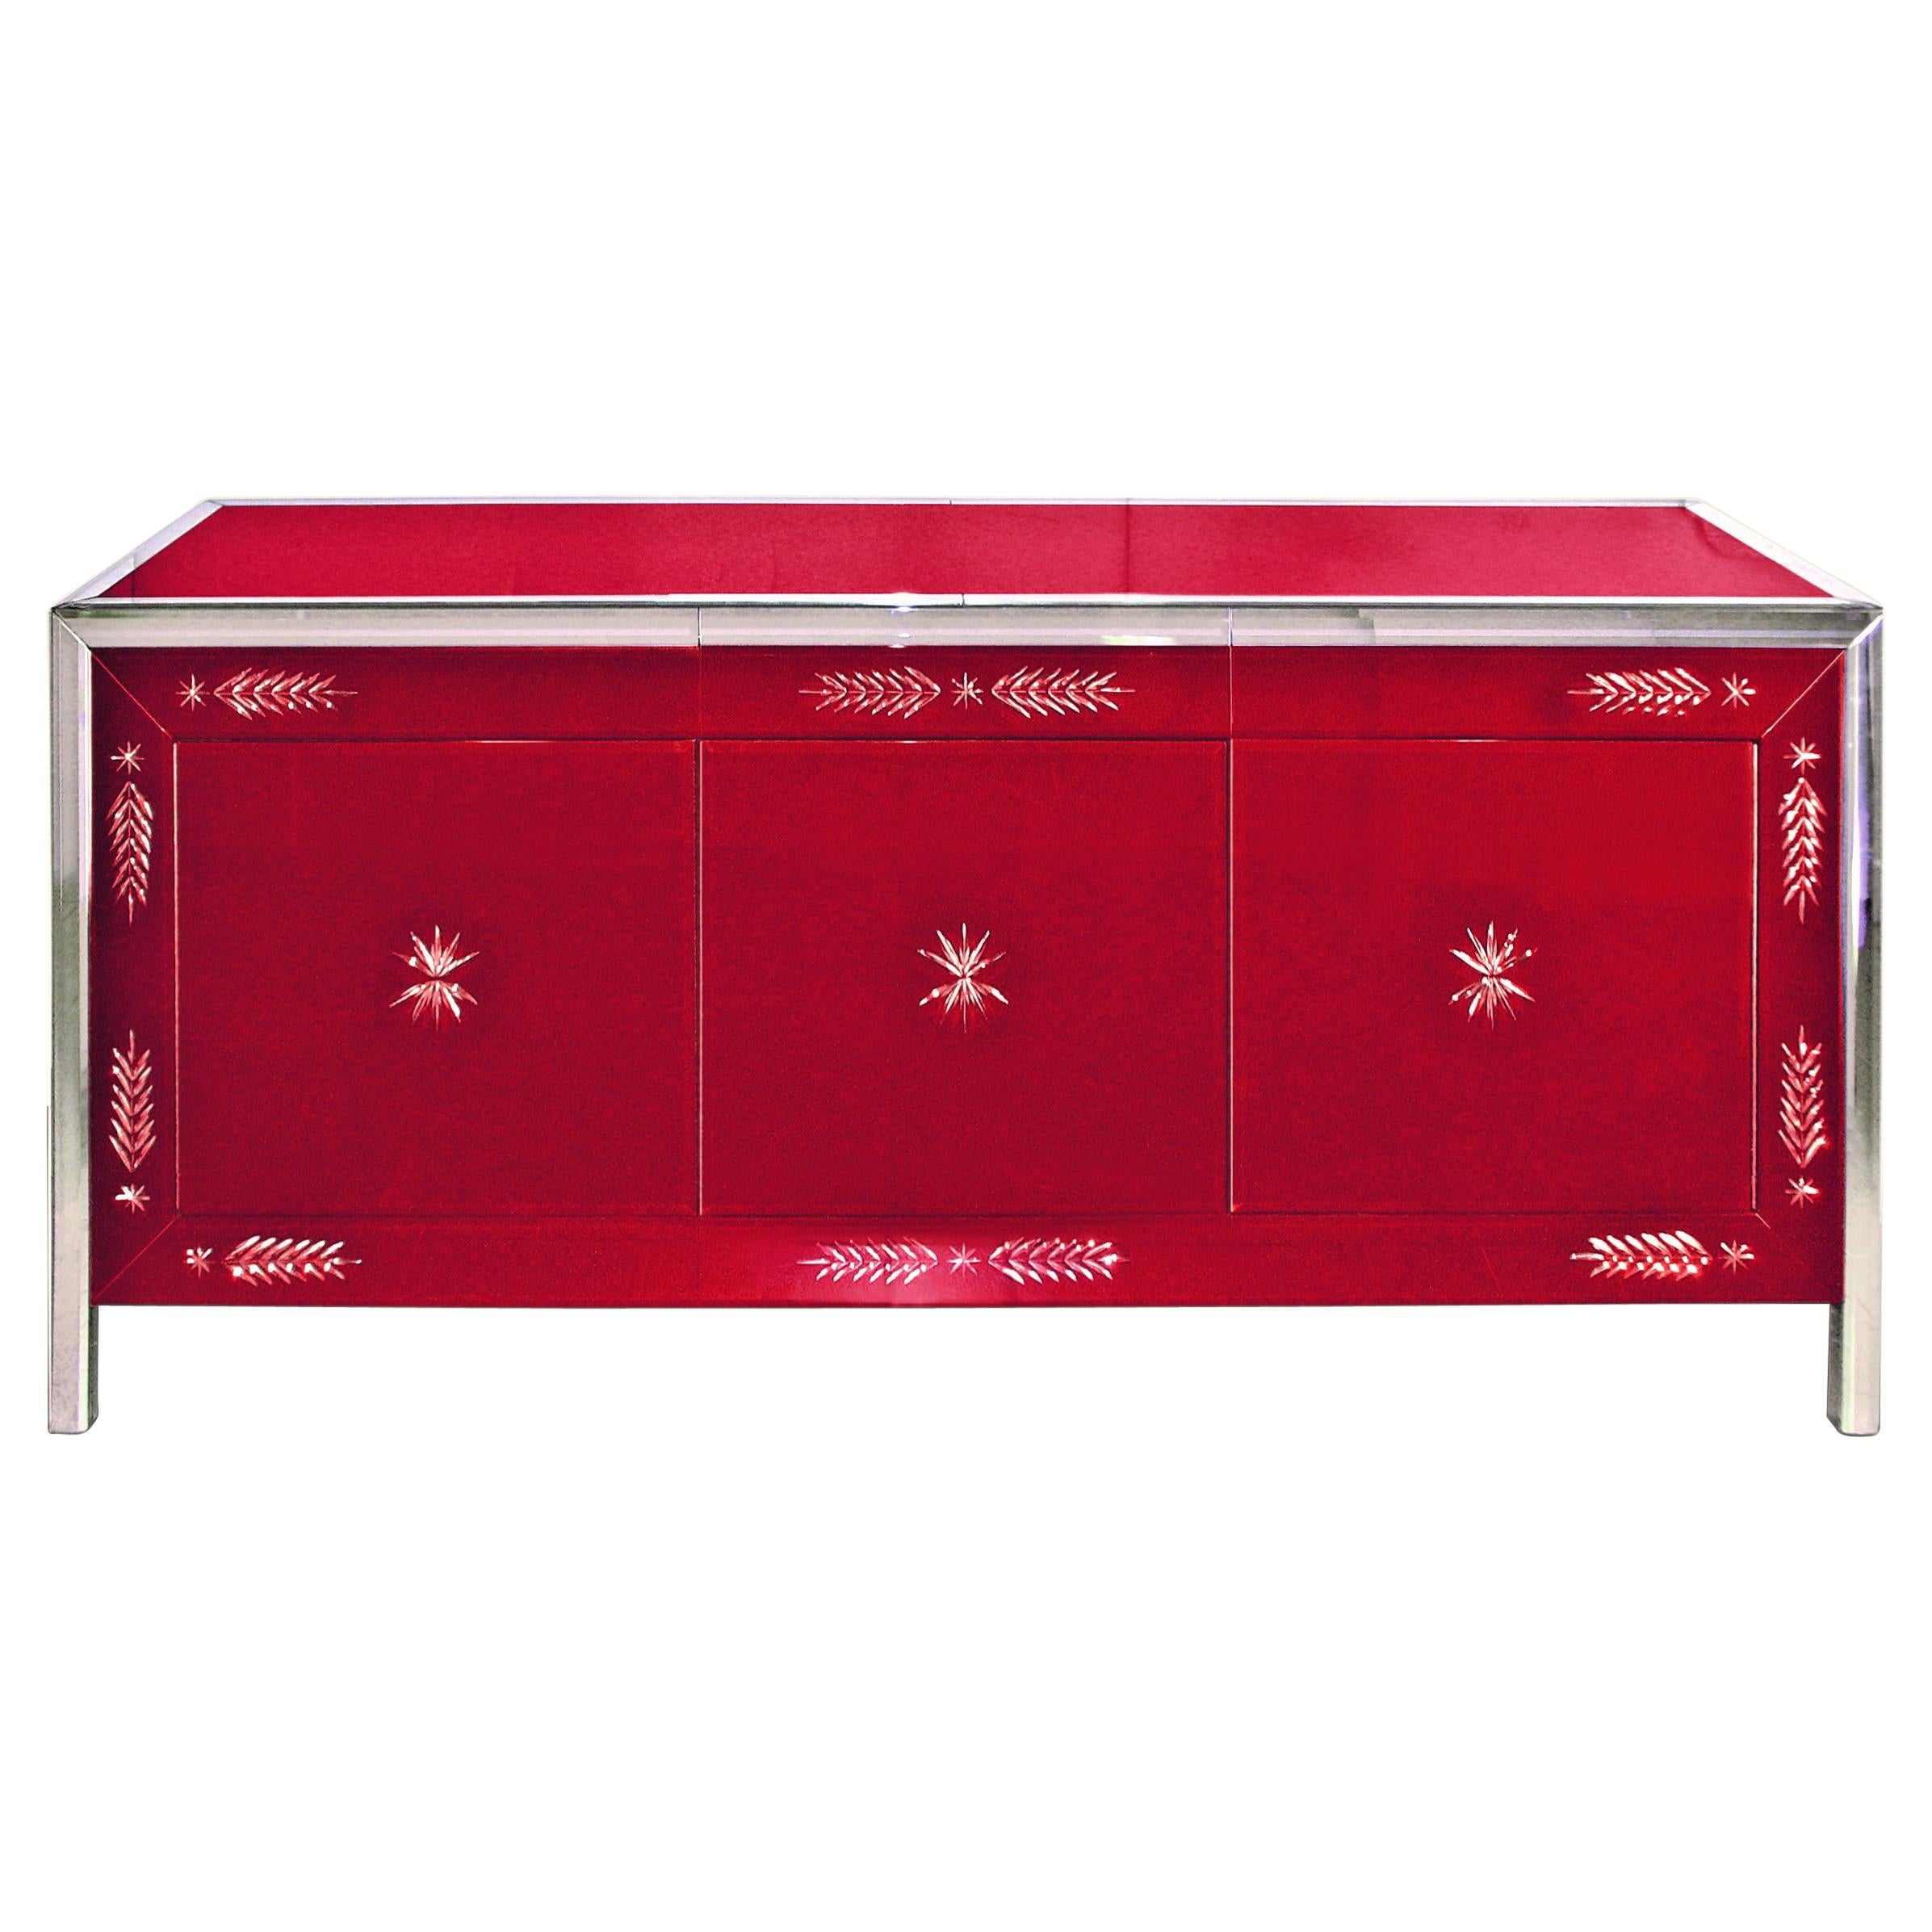 "Serenissima" Murano Glass Red Sideboard, Hand Made, Fratelli Tosi Made in Italy For Sale